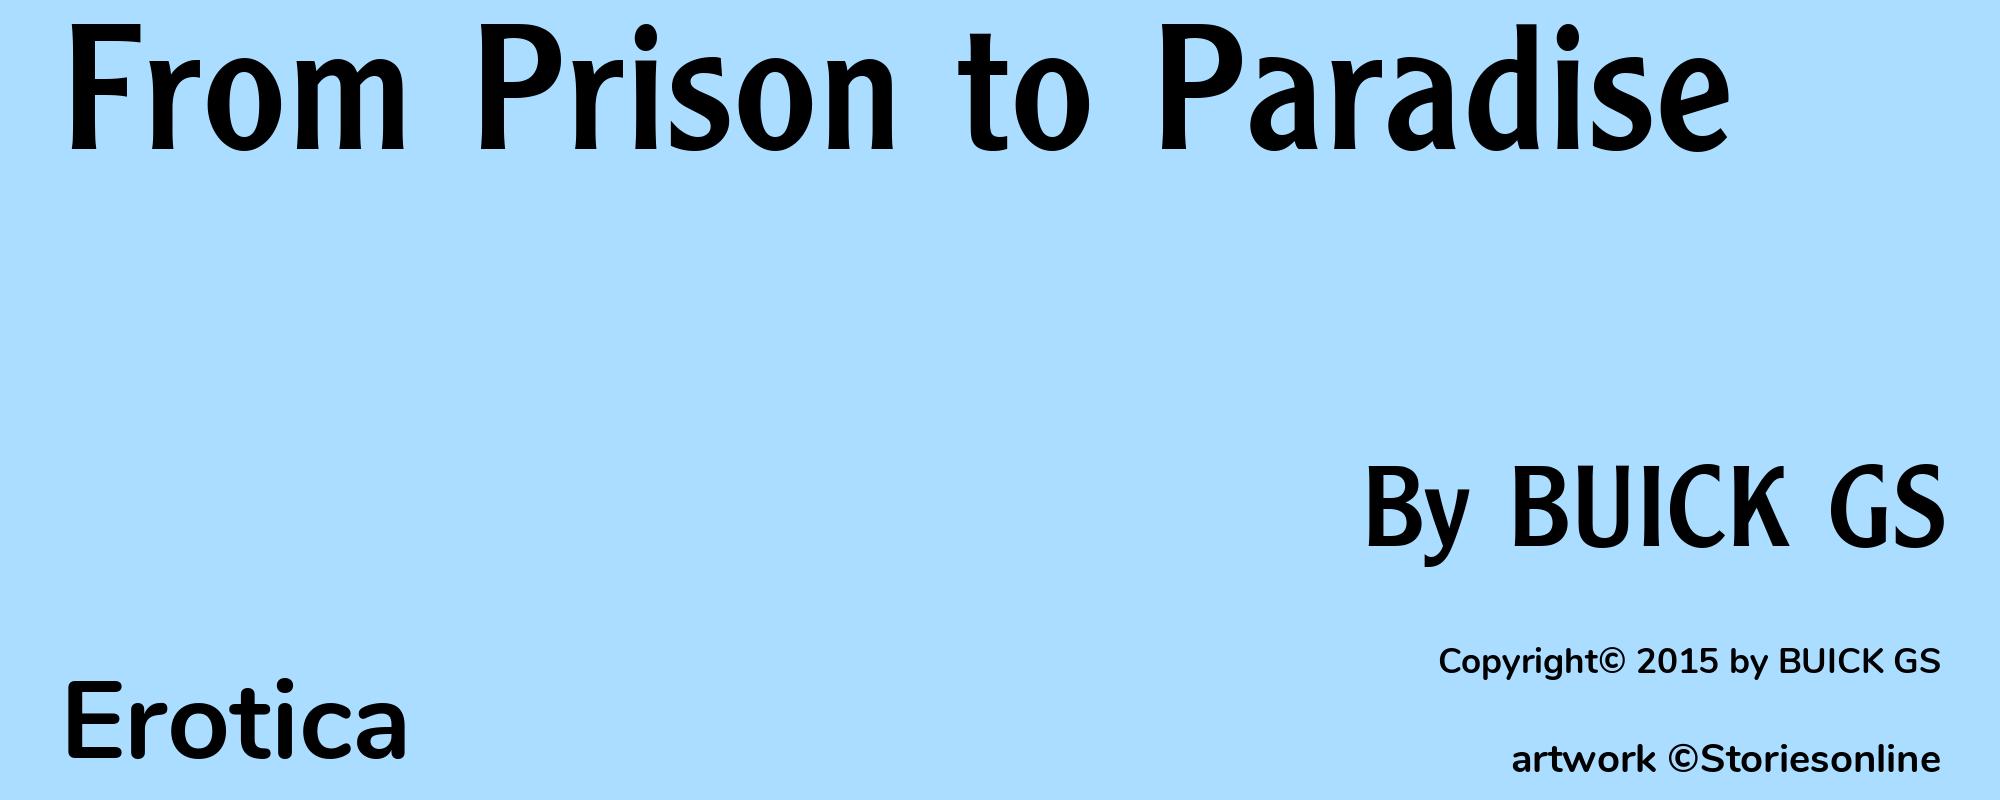 From Prison to Paradise - Cover